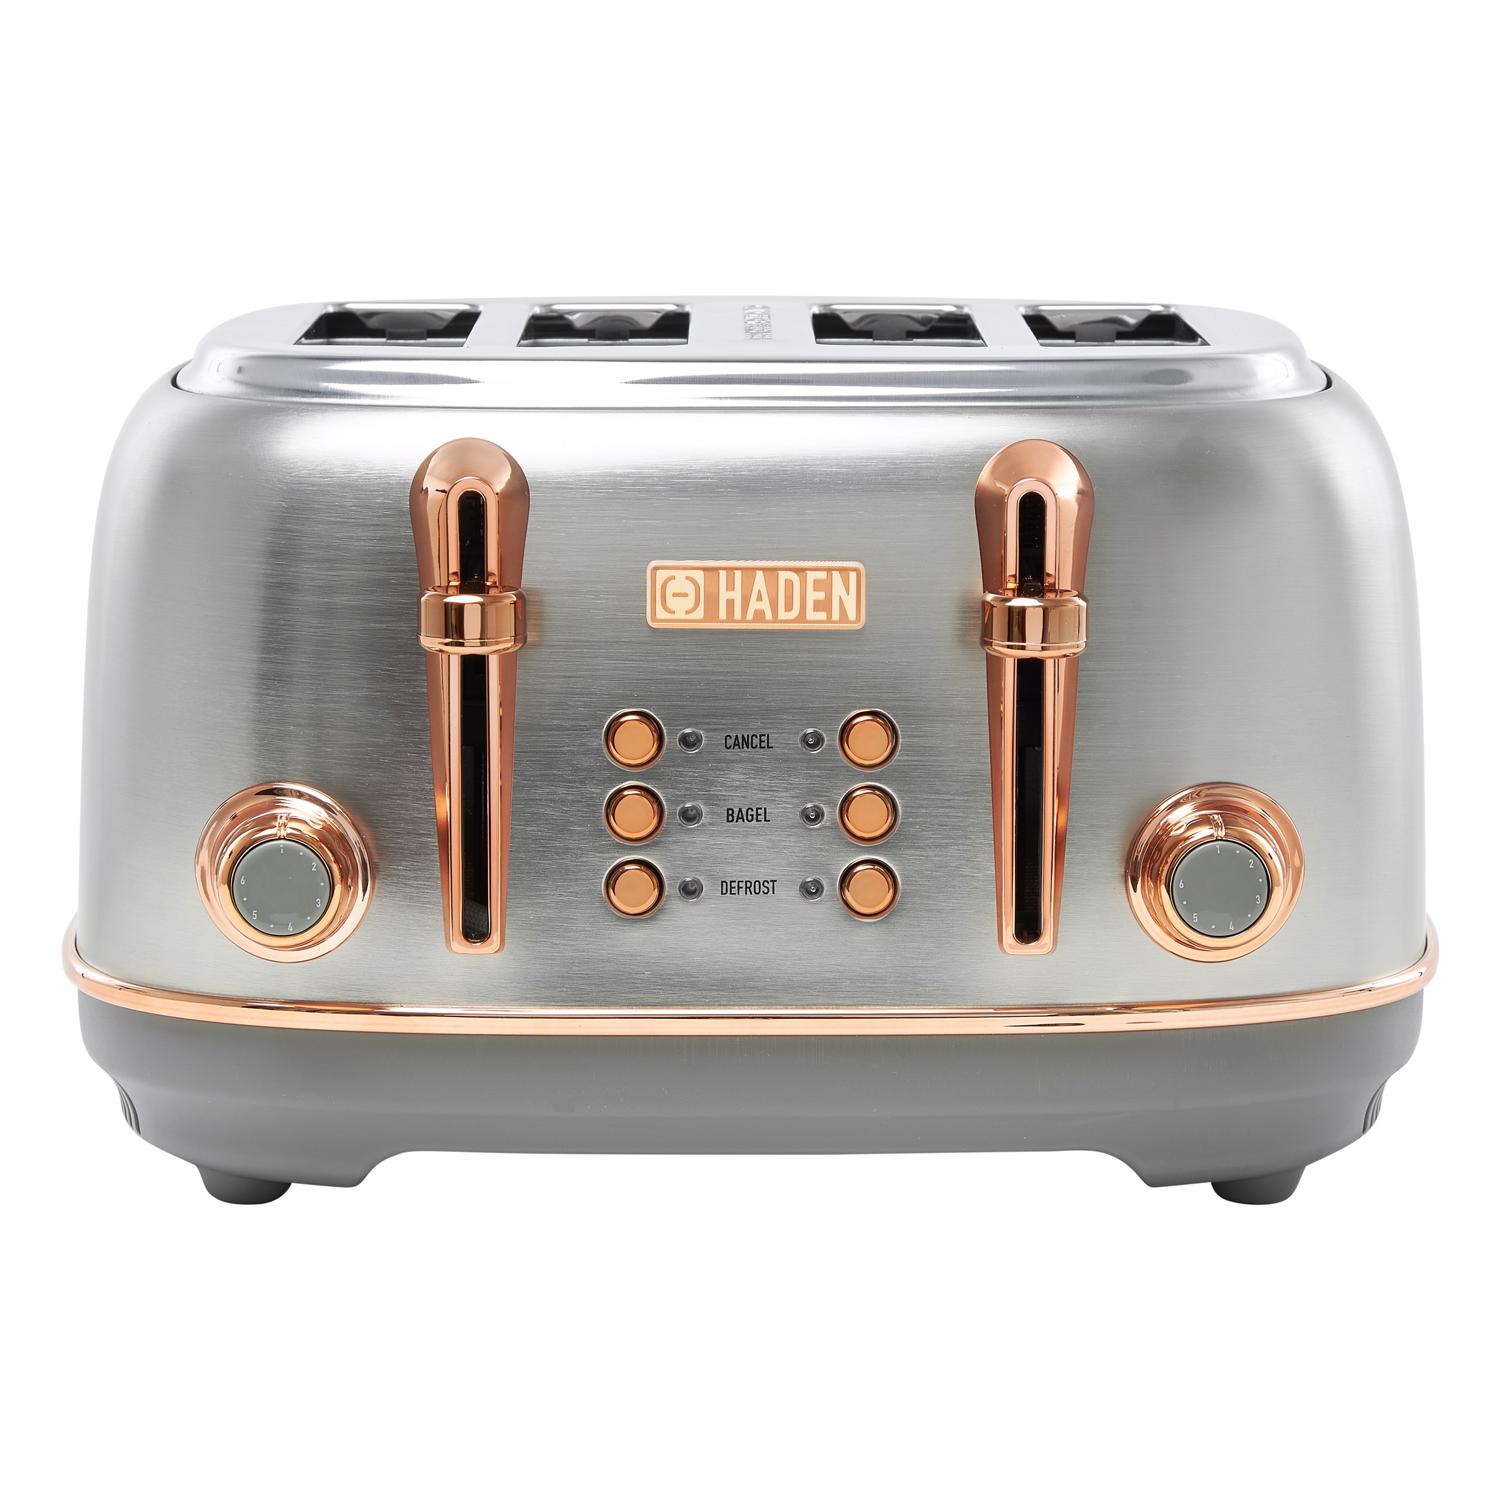 Photos - Toaster Haden Stainless Steel Silver 4 slot  8 in. H X 13 in. W X 12 in. D 